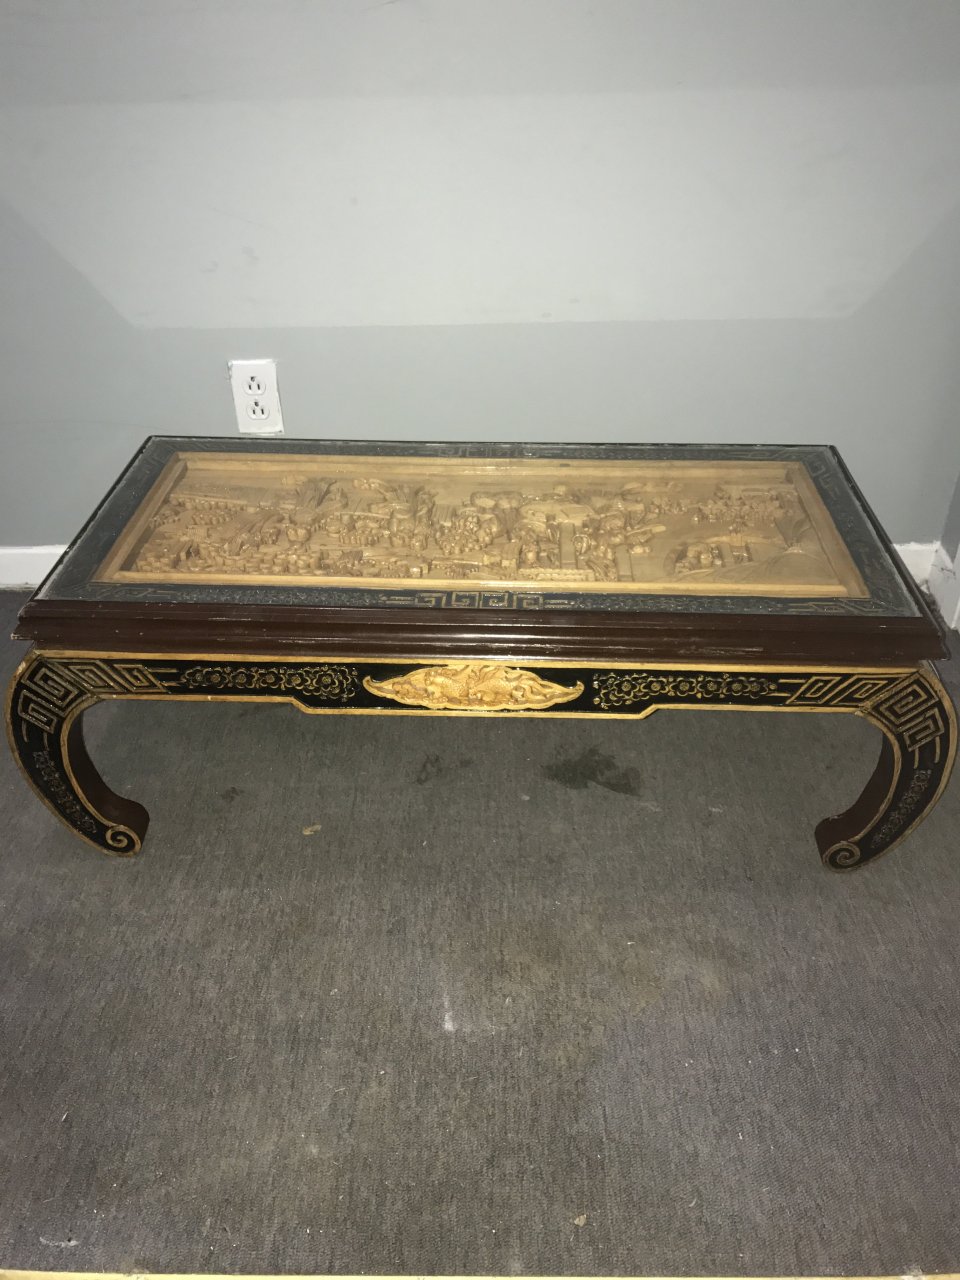 Antique Oriental Coffee Table | My Antique Furniture Collection